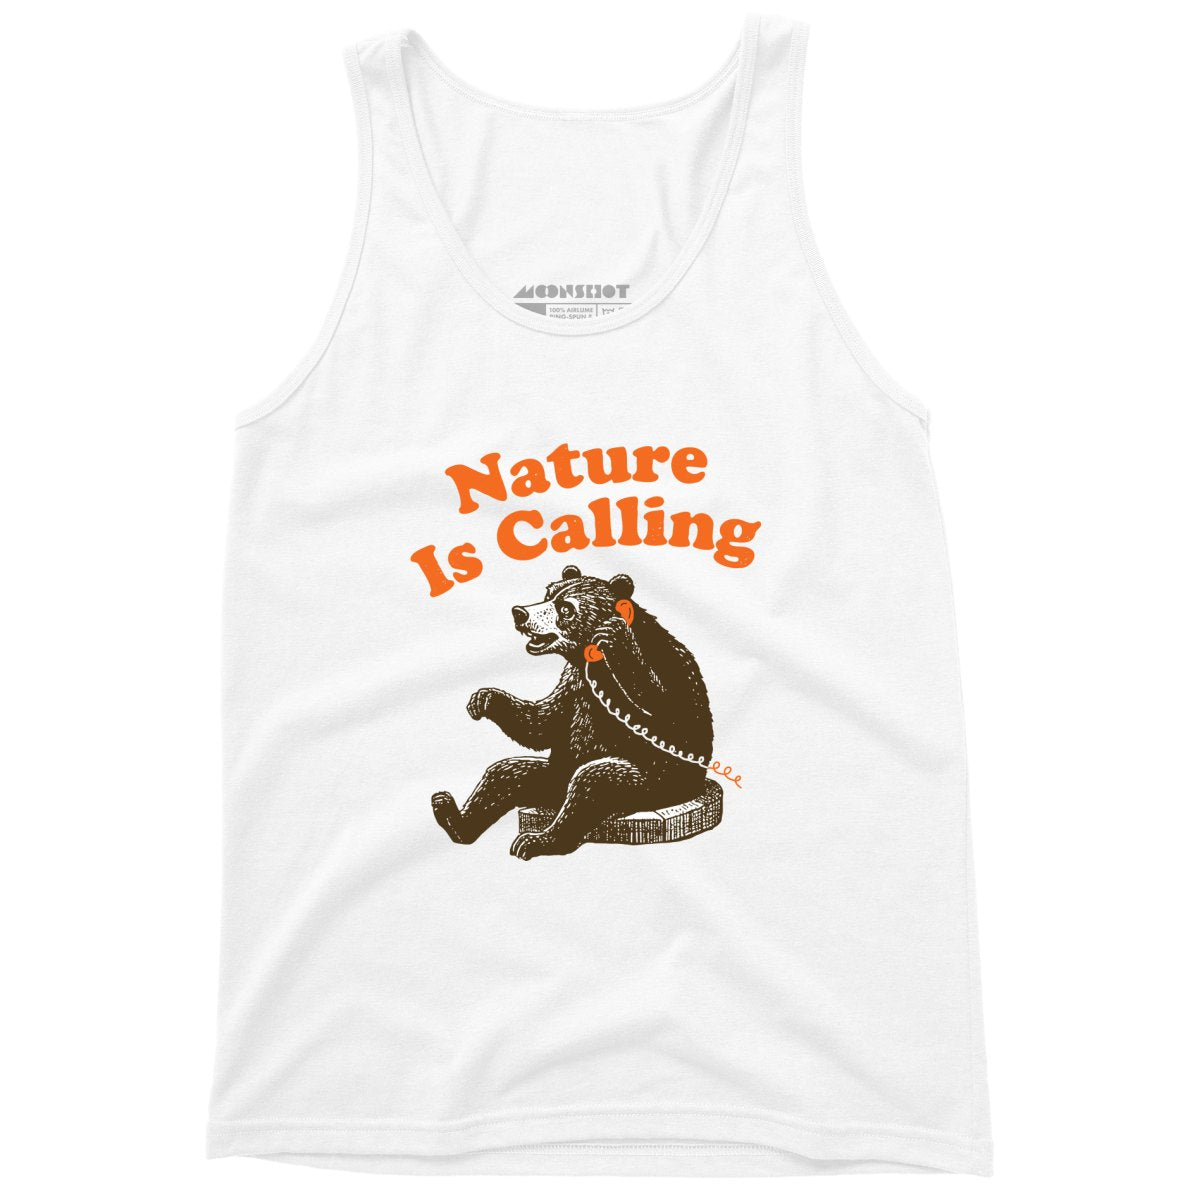 Nature is Calling - Unisex Tank Top